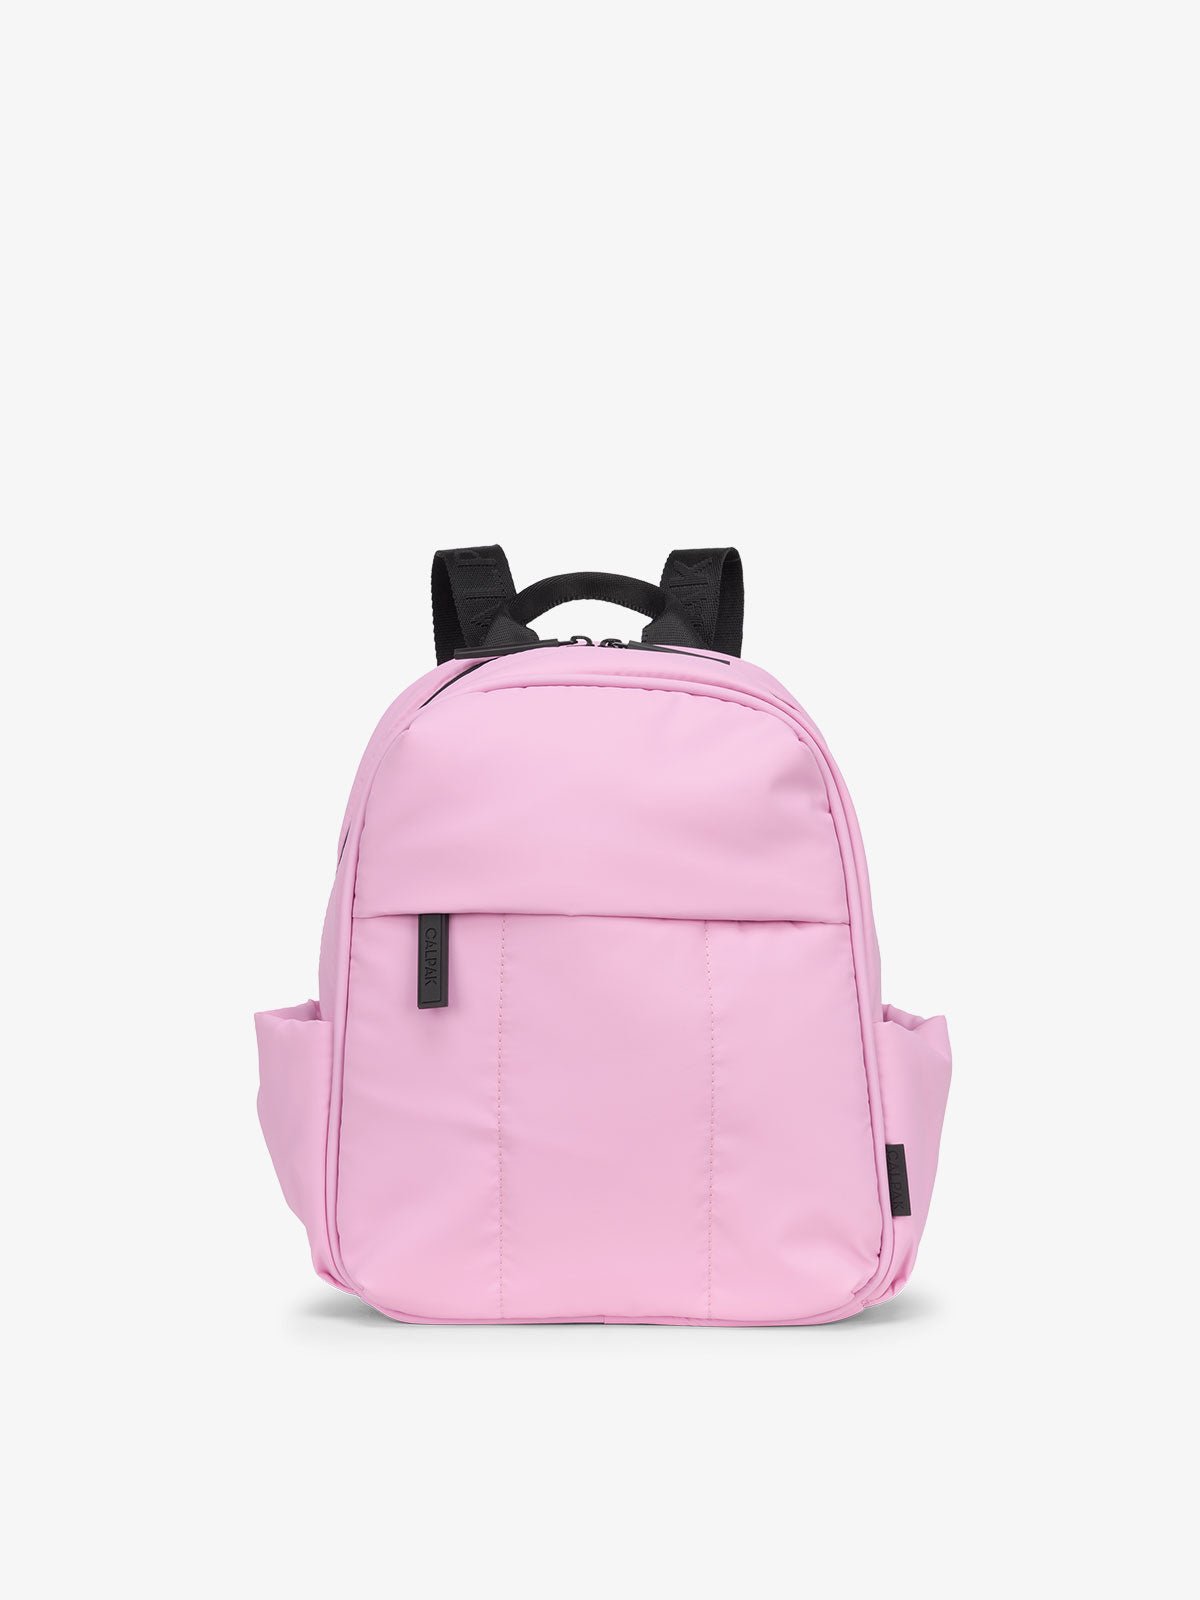 CALPAK Luka Mini Backpack with soft puffy exterior and front zippered pocket in pink